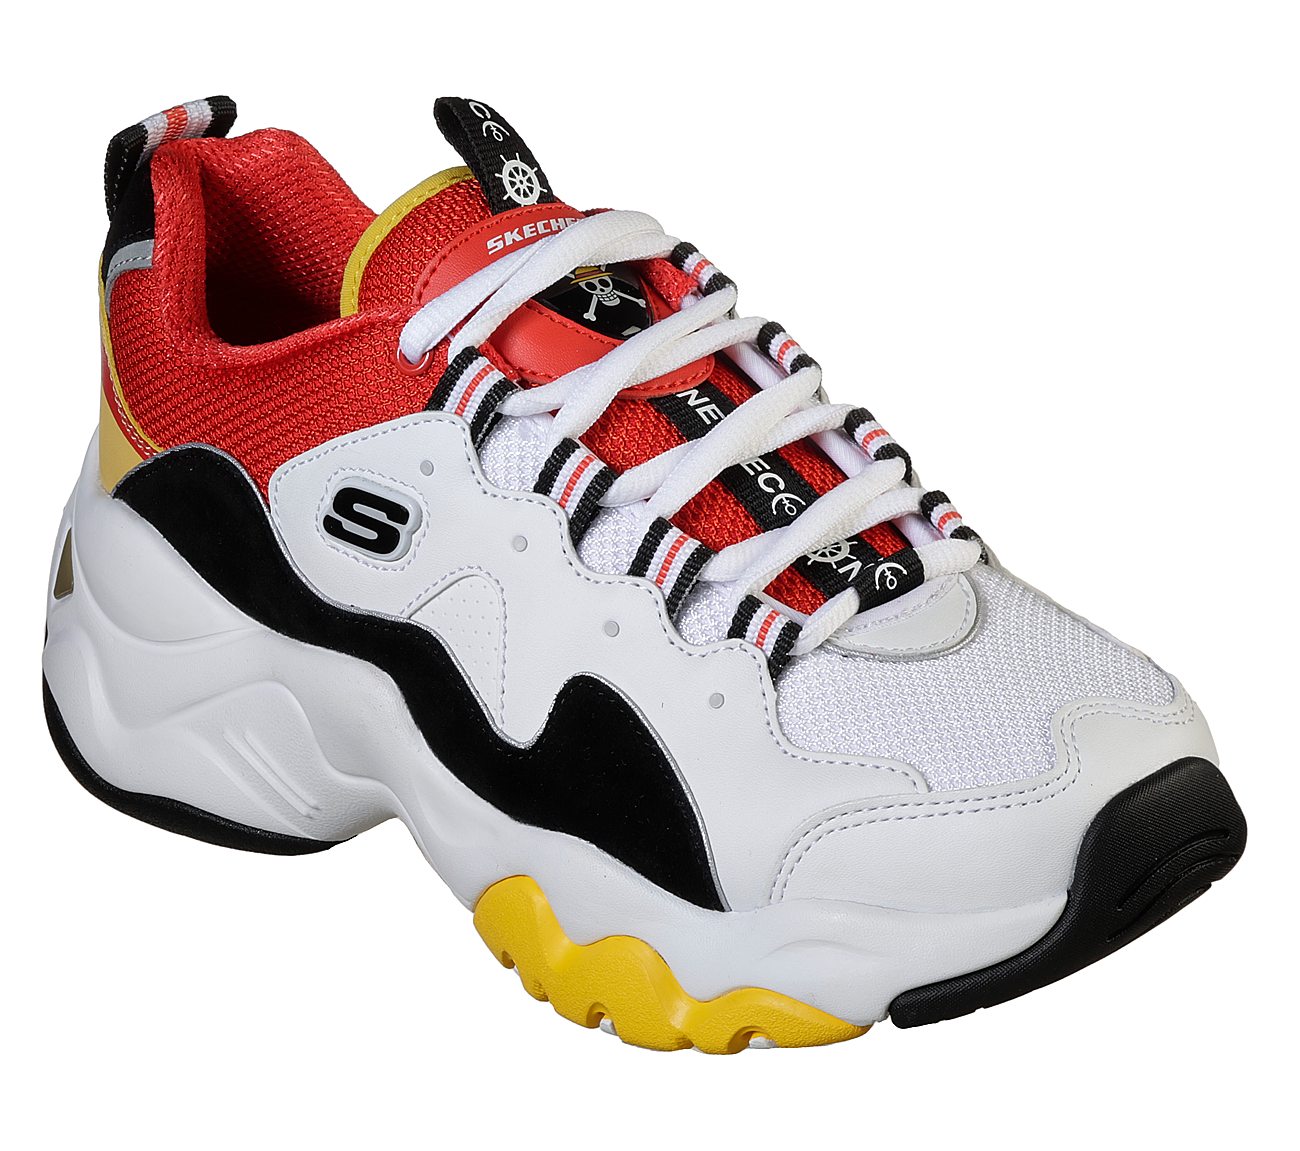 fluido Burro Integrar Skechers collabs with One Piece for new D'Lites 3.0 collection